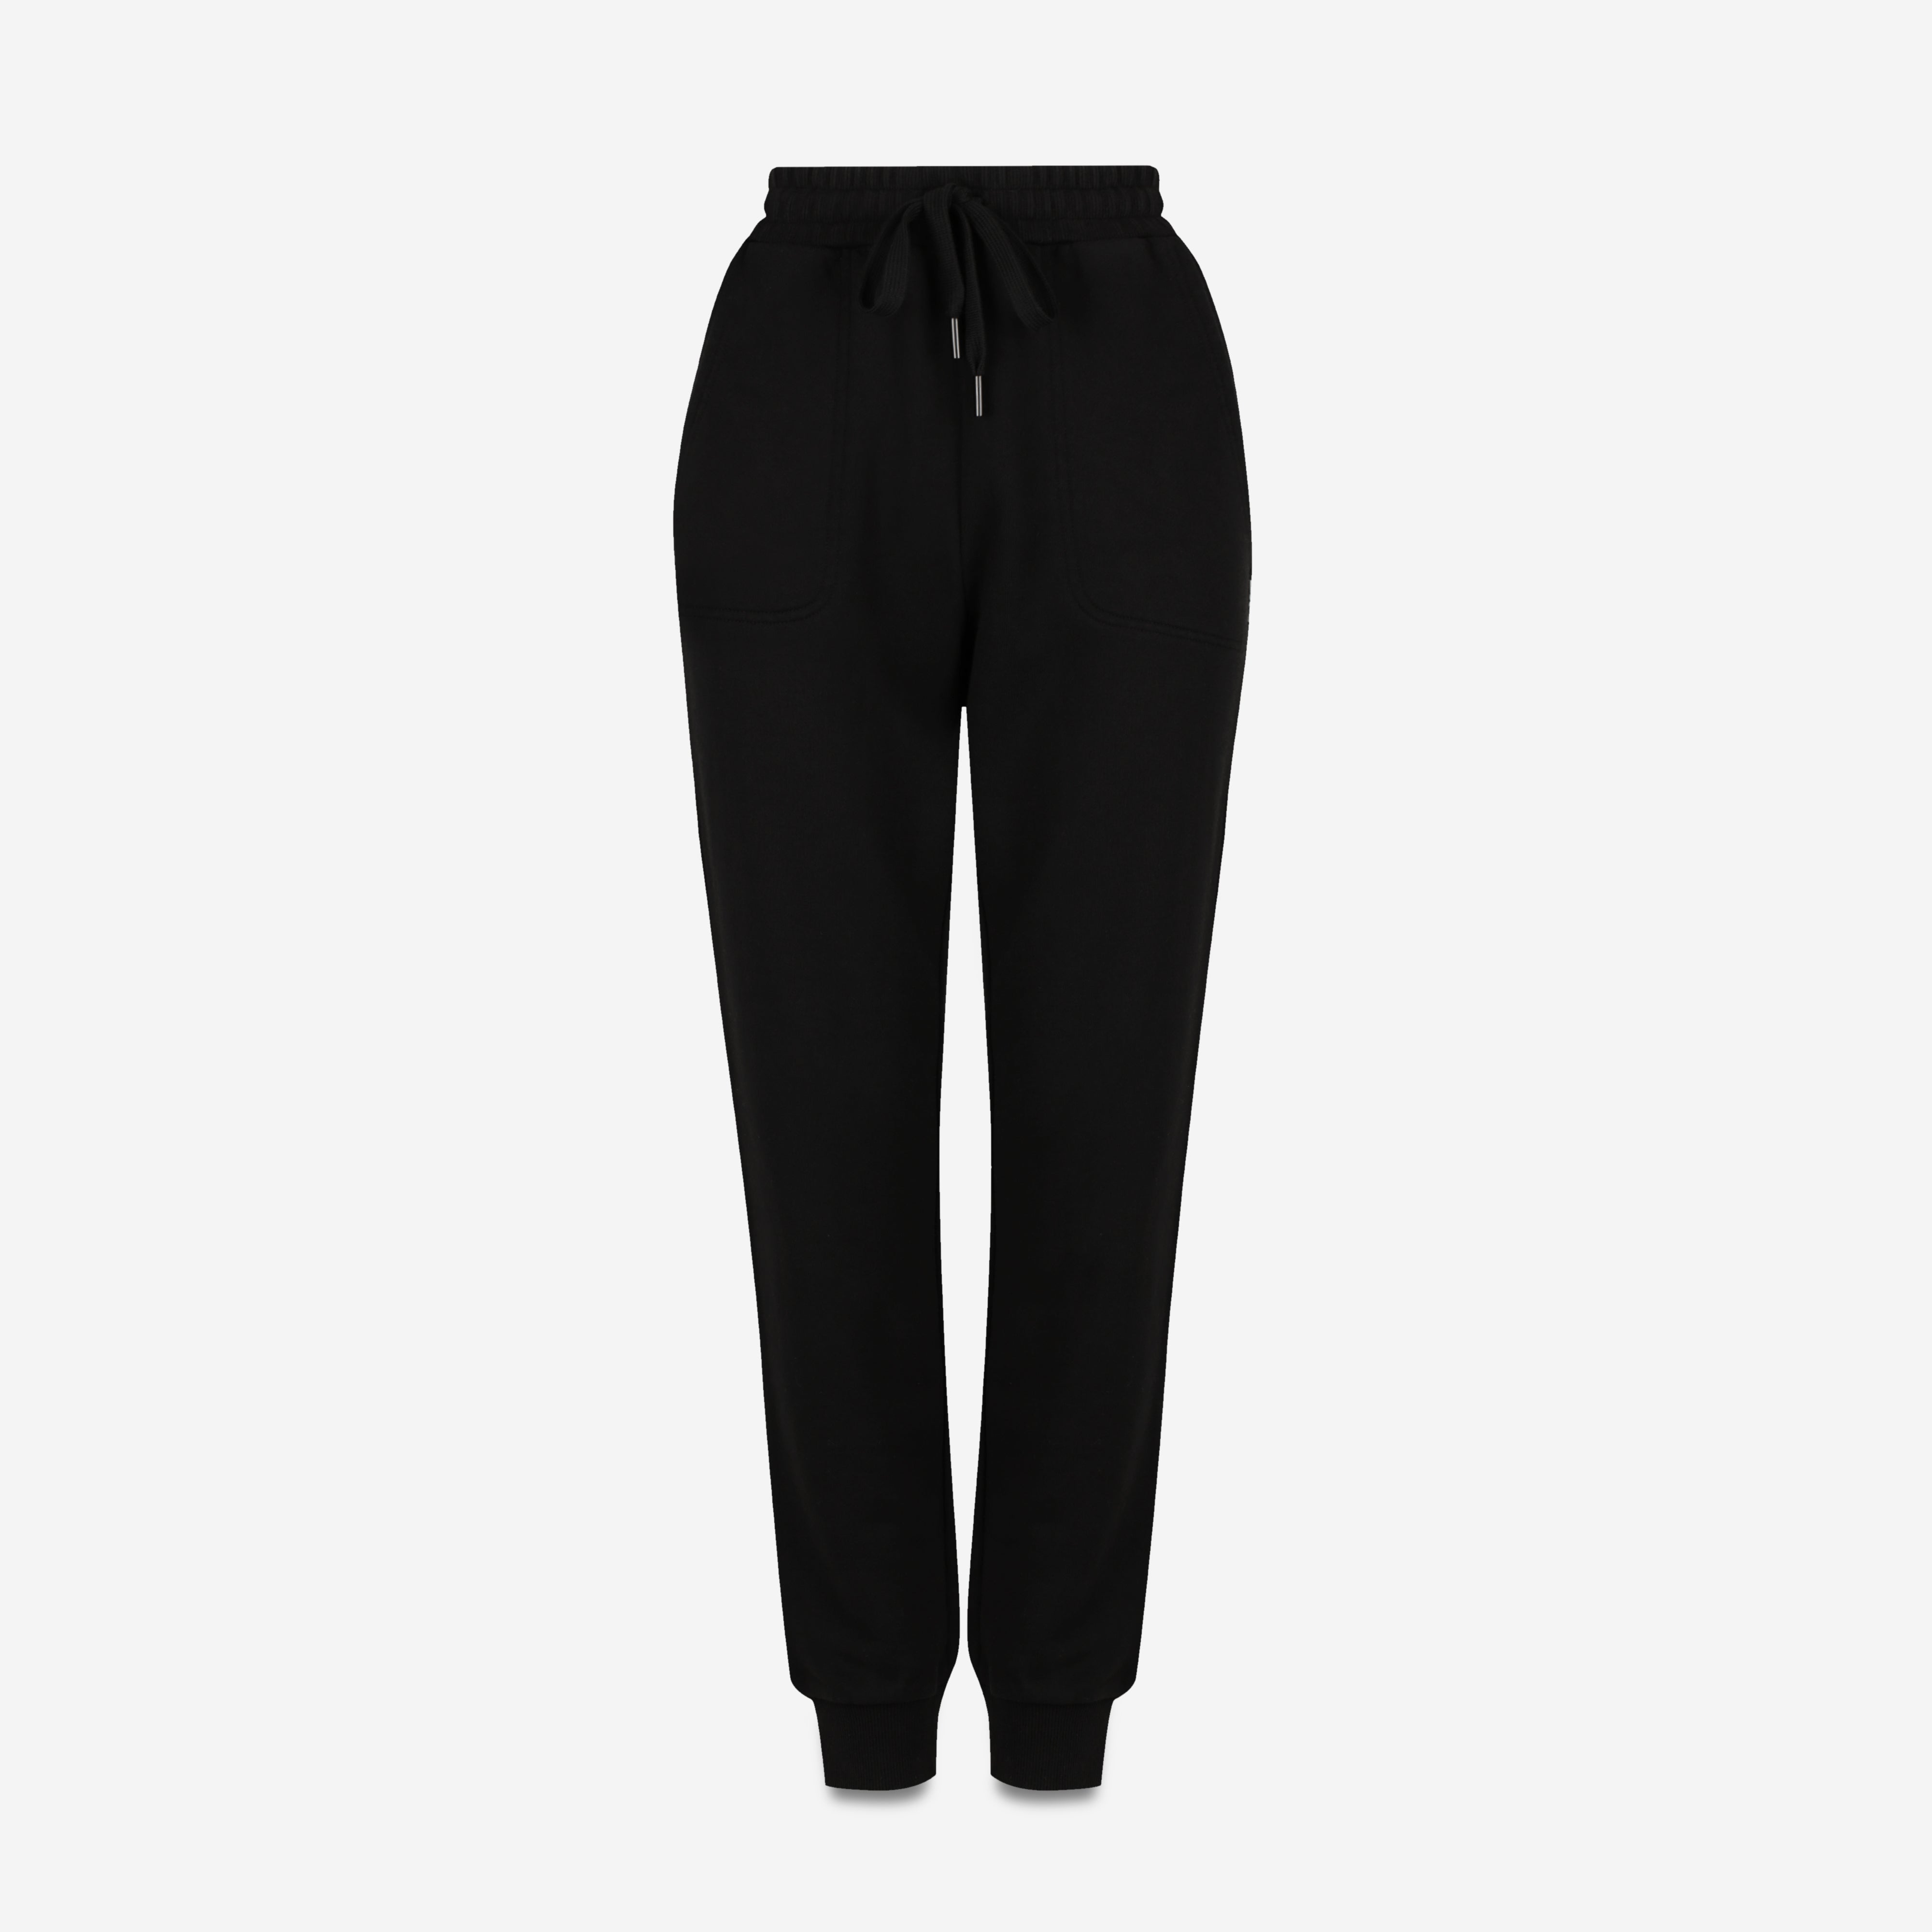 As You Wake - Women's Track Pant / Soft Black